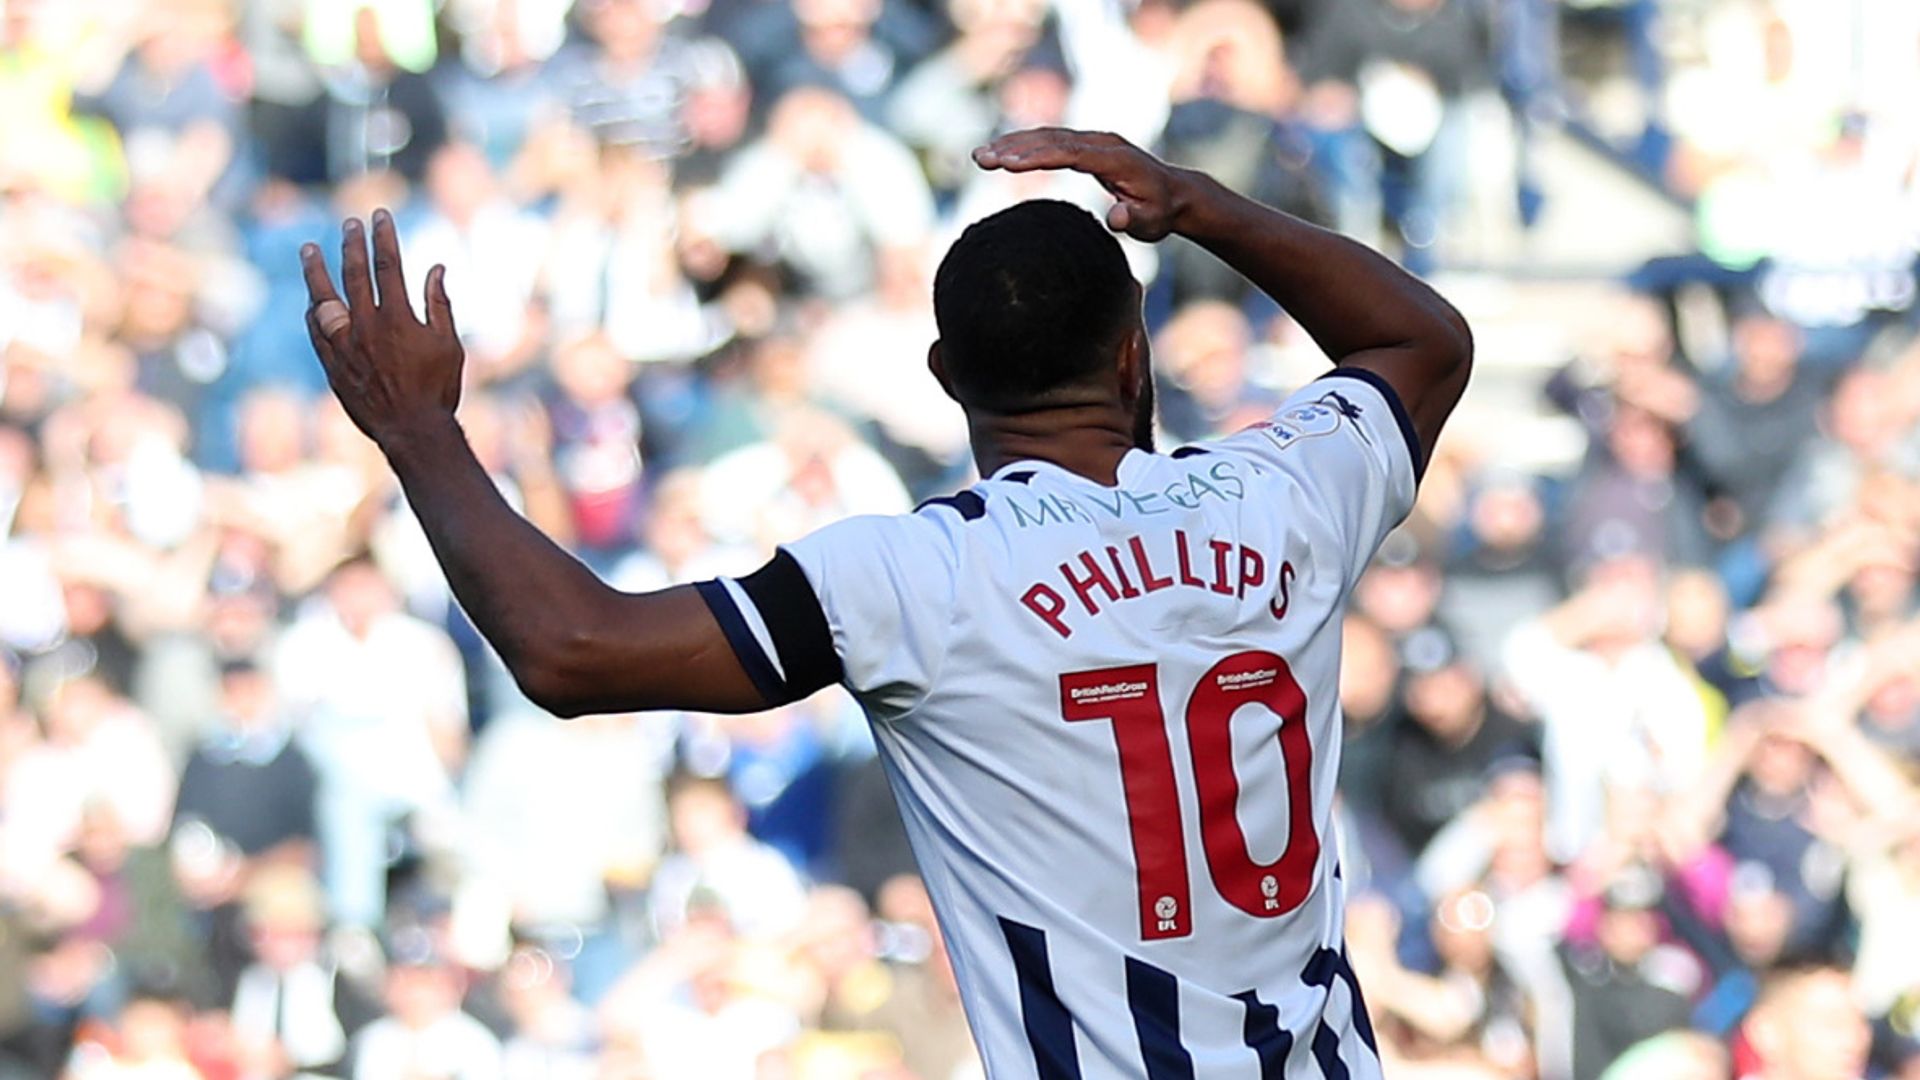 West Brom, Millwall play out goalless draw